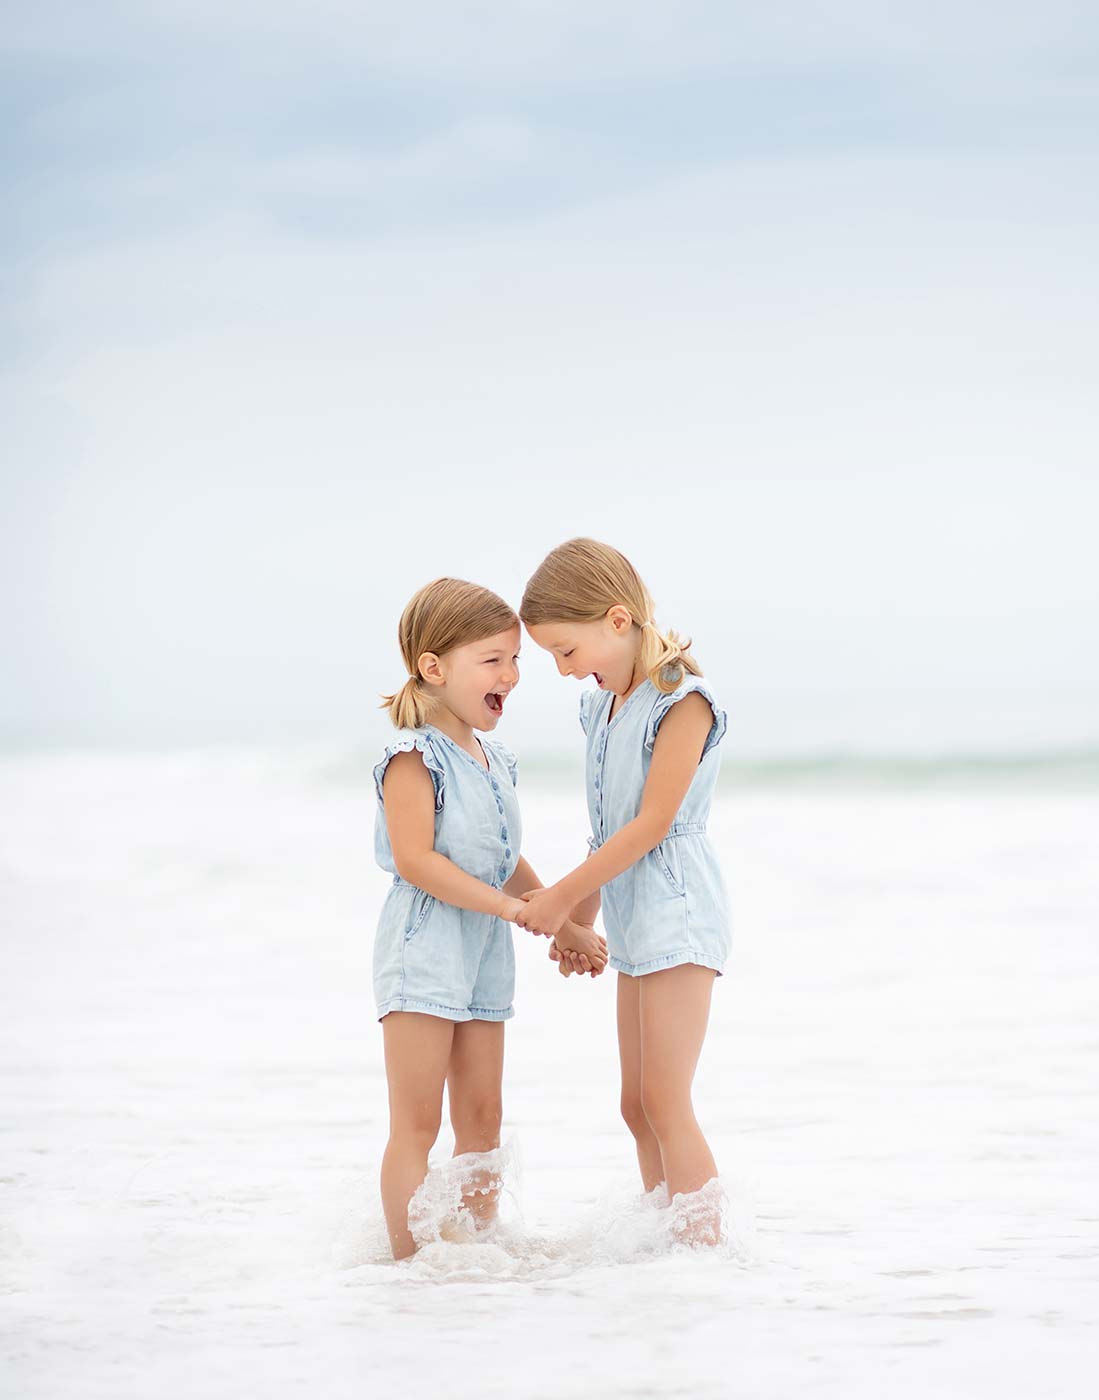 Two sisters in denim dresses sharing a laugh amidst the waves in East Hampton, NY